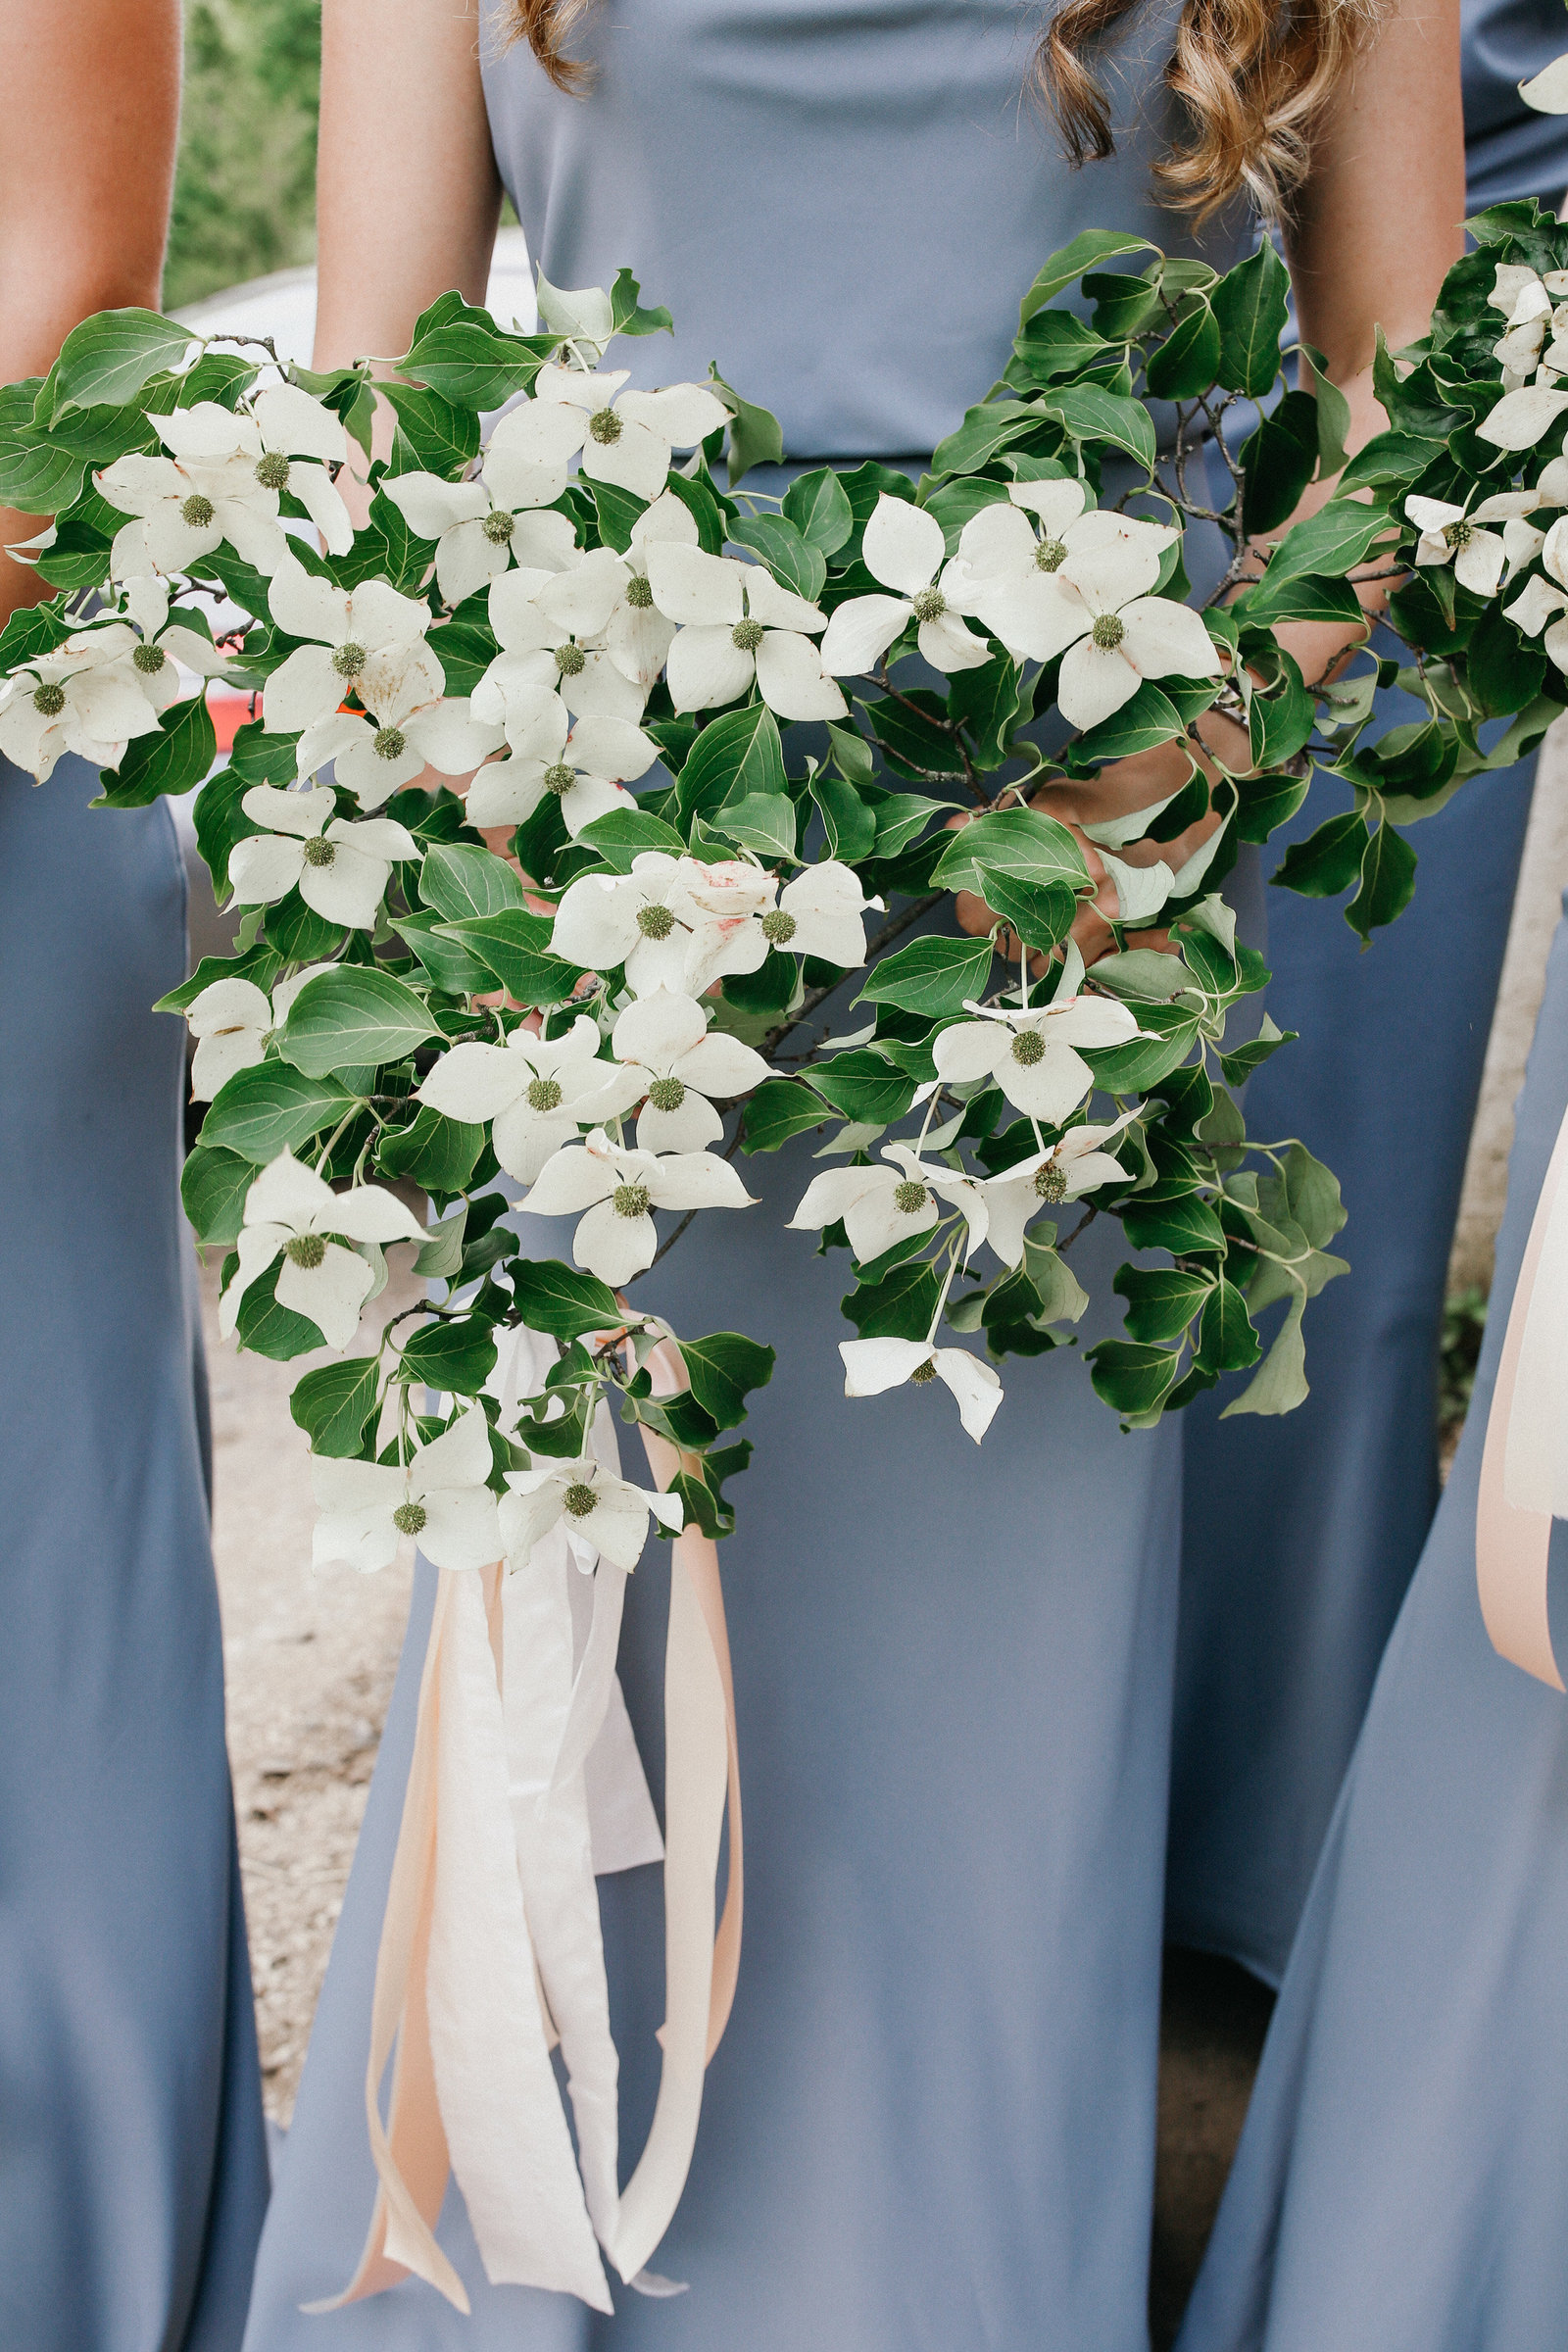 The creamy white dogwood blossoms pop against these gray bridesmaid dresses.